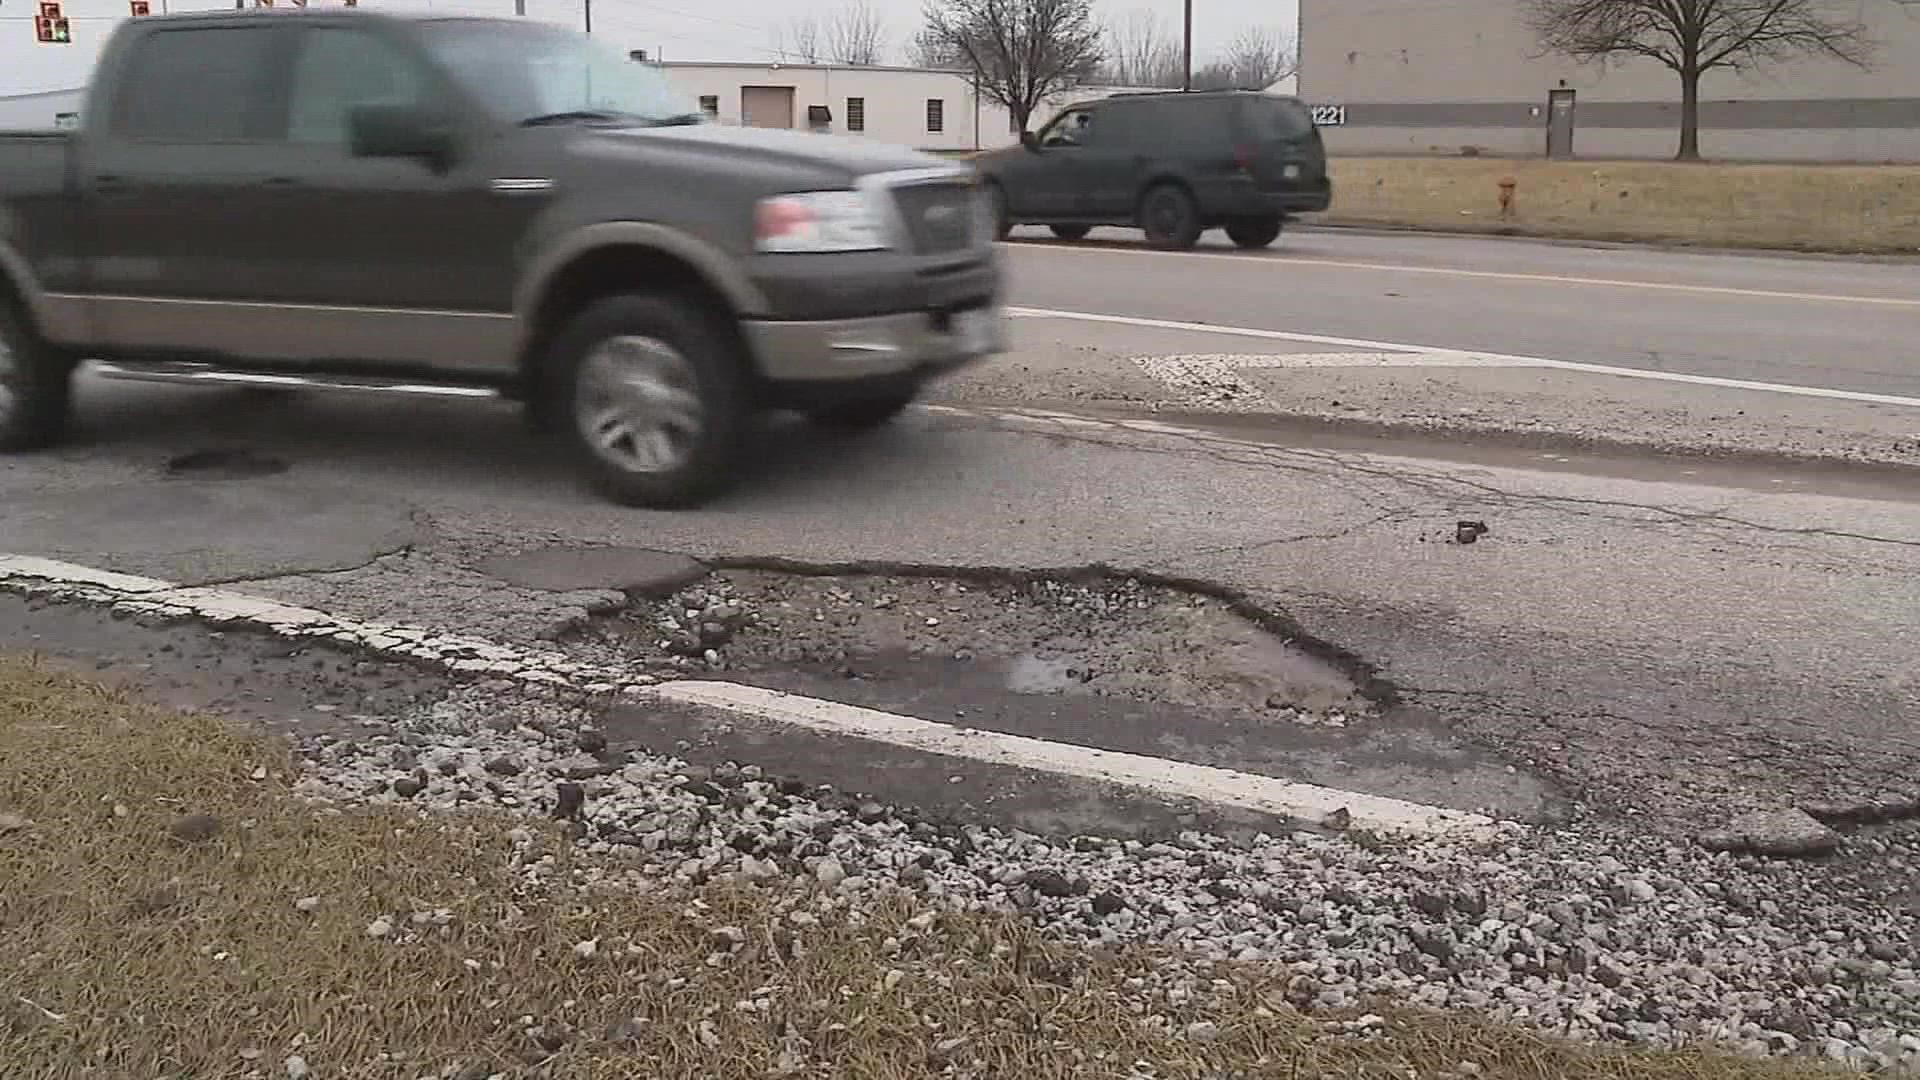 The process for reporting potholes around central Ohio depends on where drivers find them.